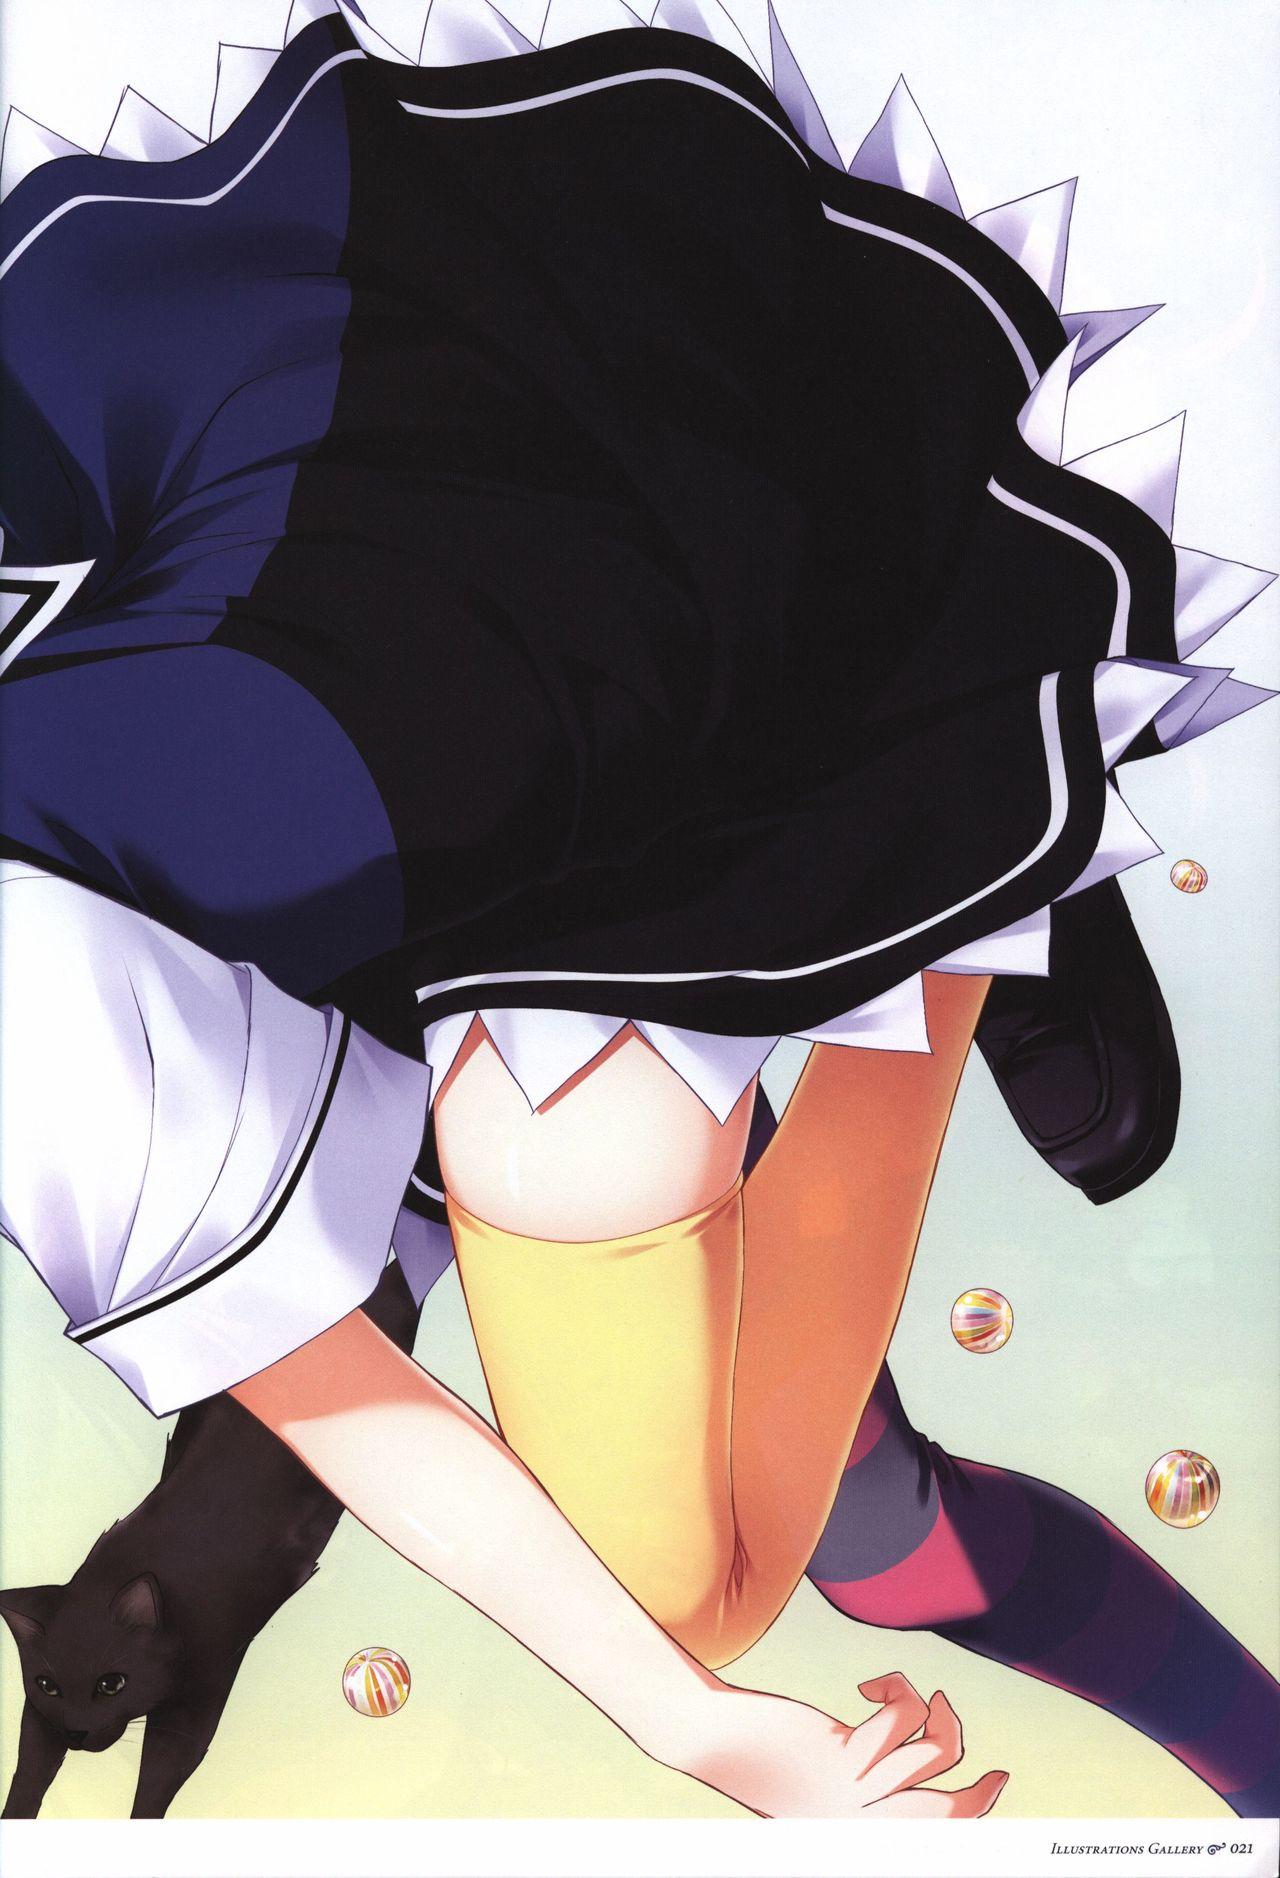 The Fruit of Grisaia Visual FanBook 21